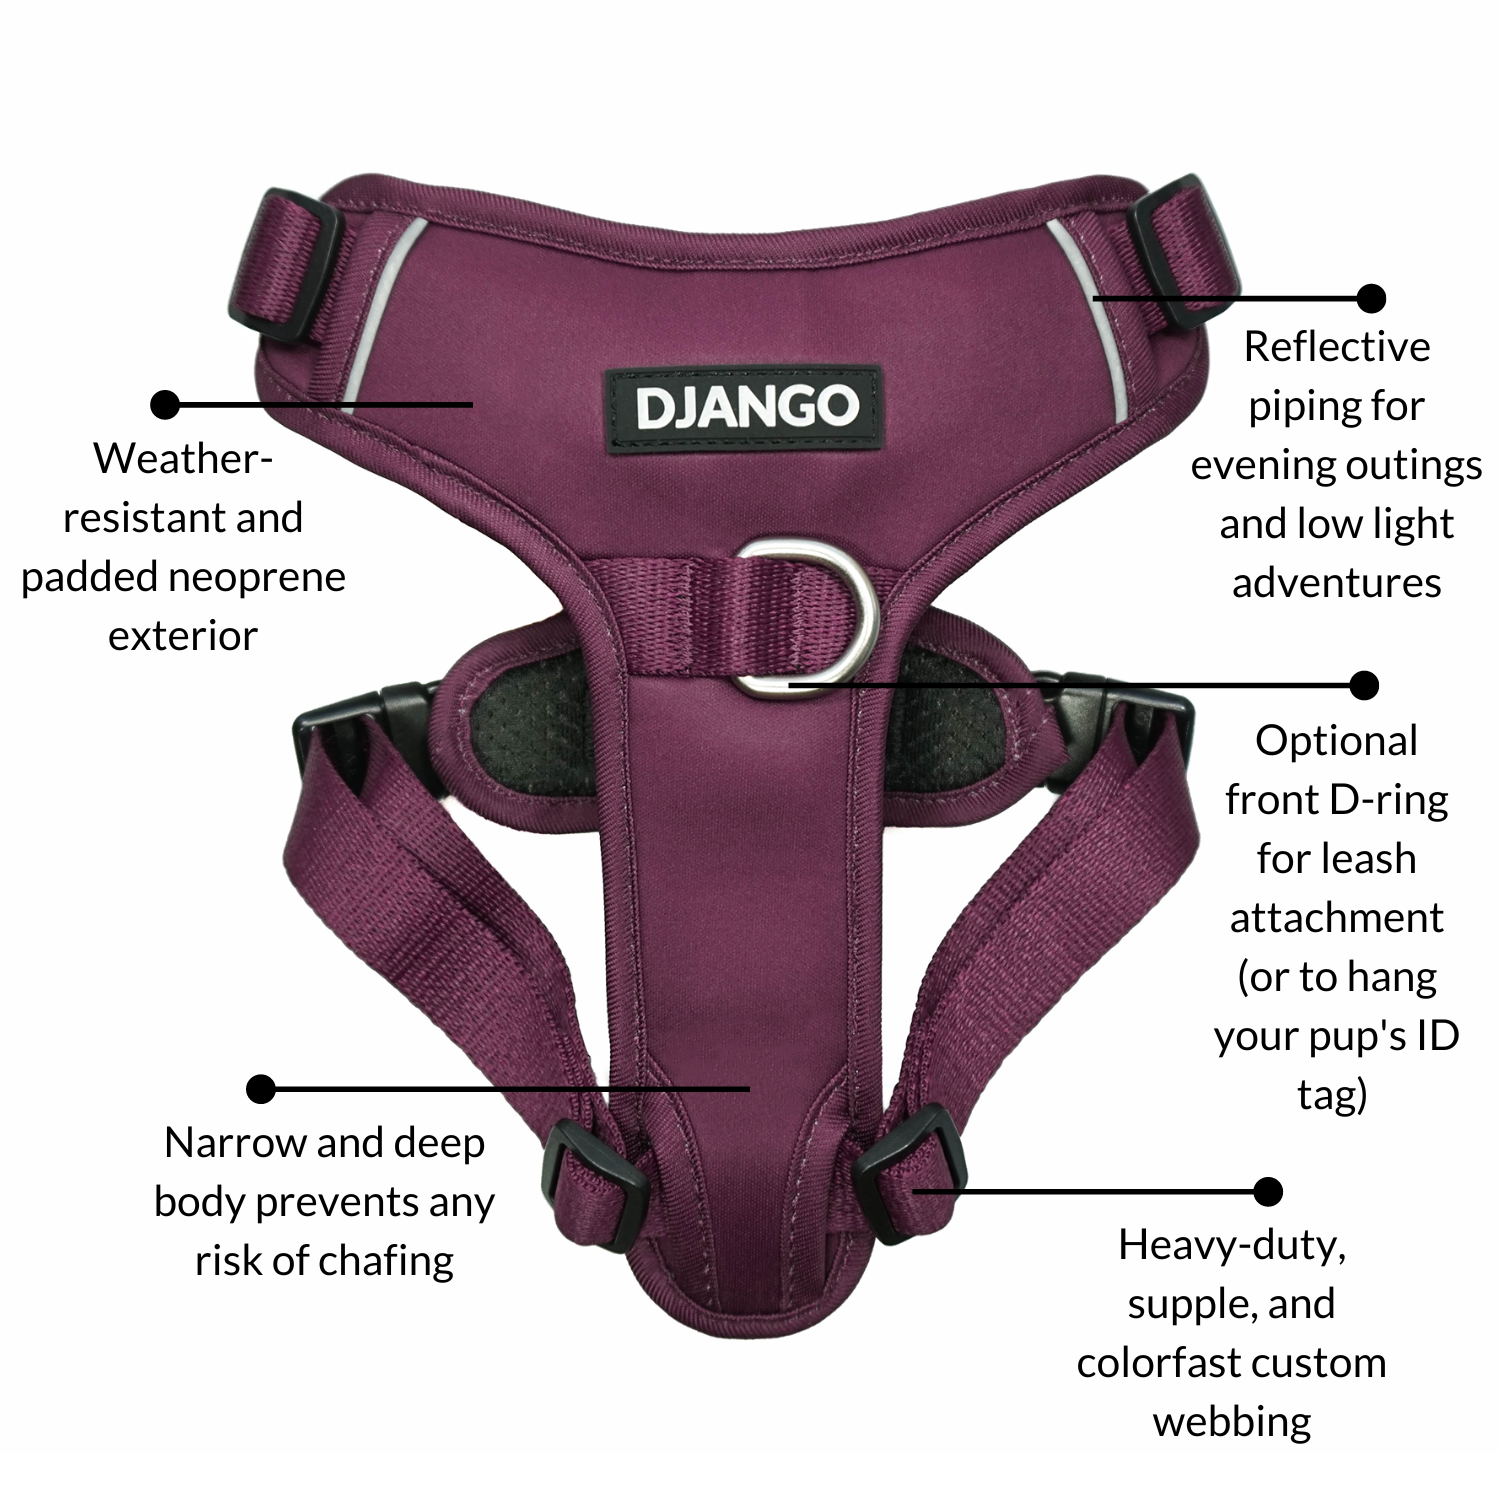 DJANGO Tahoe No Pull Dog Harness - Key features include a weather-resistant and padded neoprene exterior, a narrow and deep harness body (to prevent the risk of chafing) reflective piping, and soft webbing. Maisey is a miniature poodle and bichon mix and wears size small in all DJANGO dog harnesses. - djangobrand.com